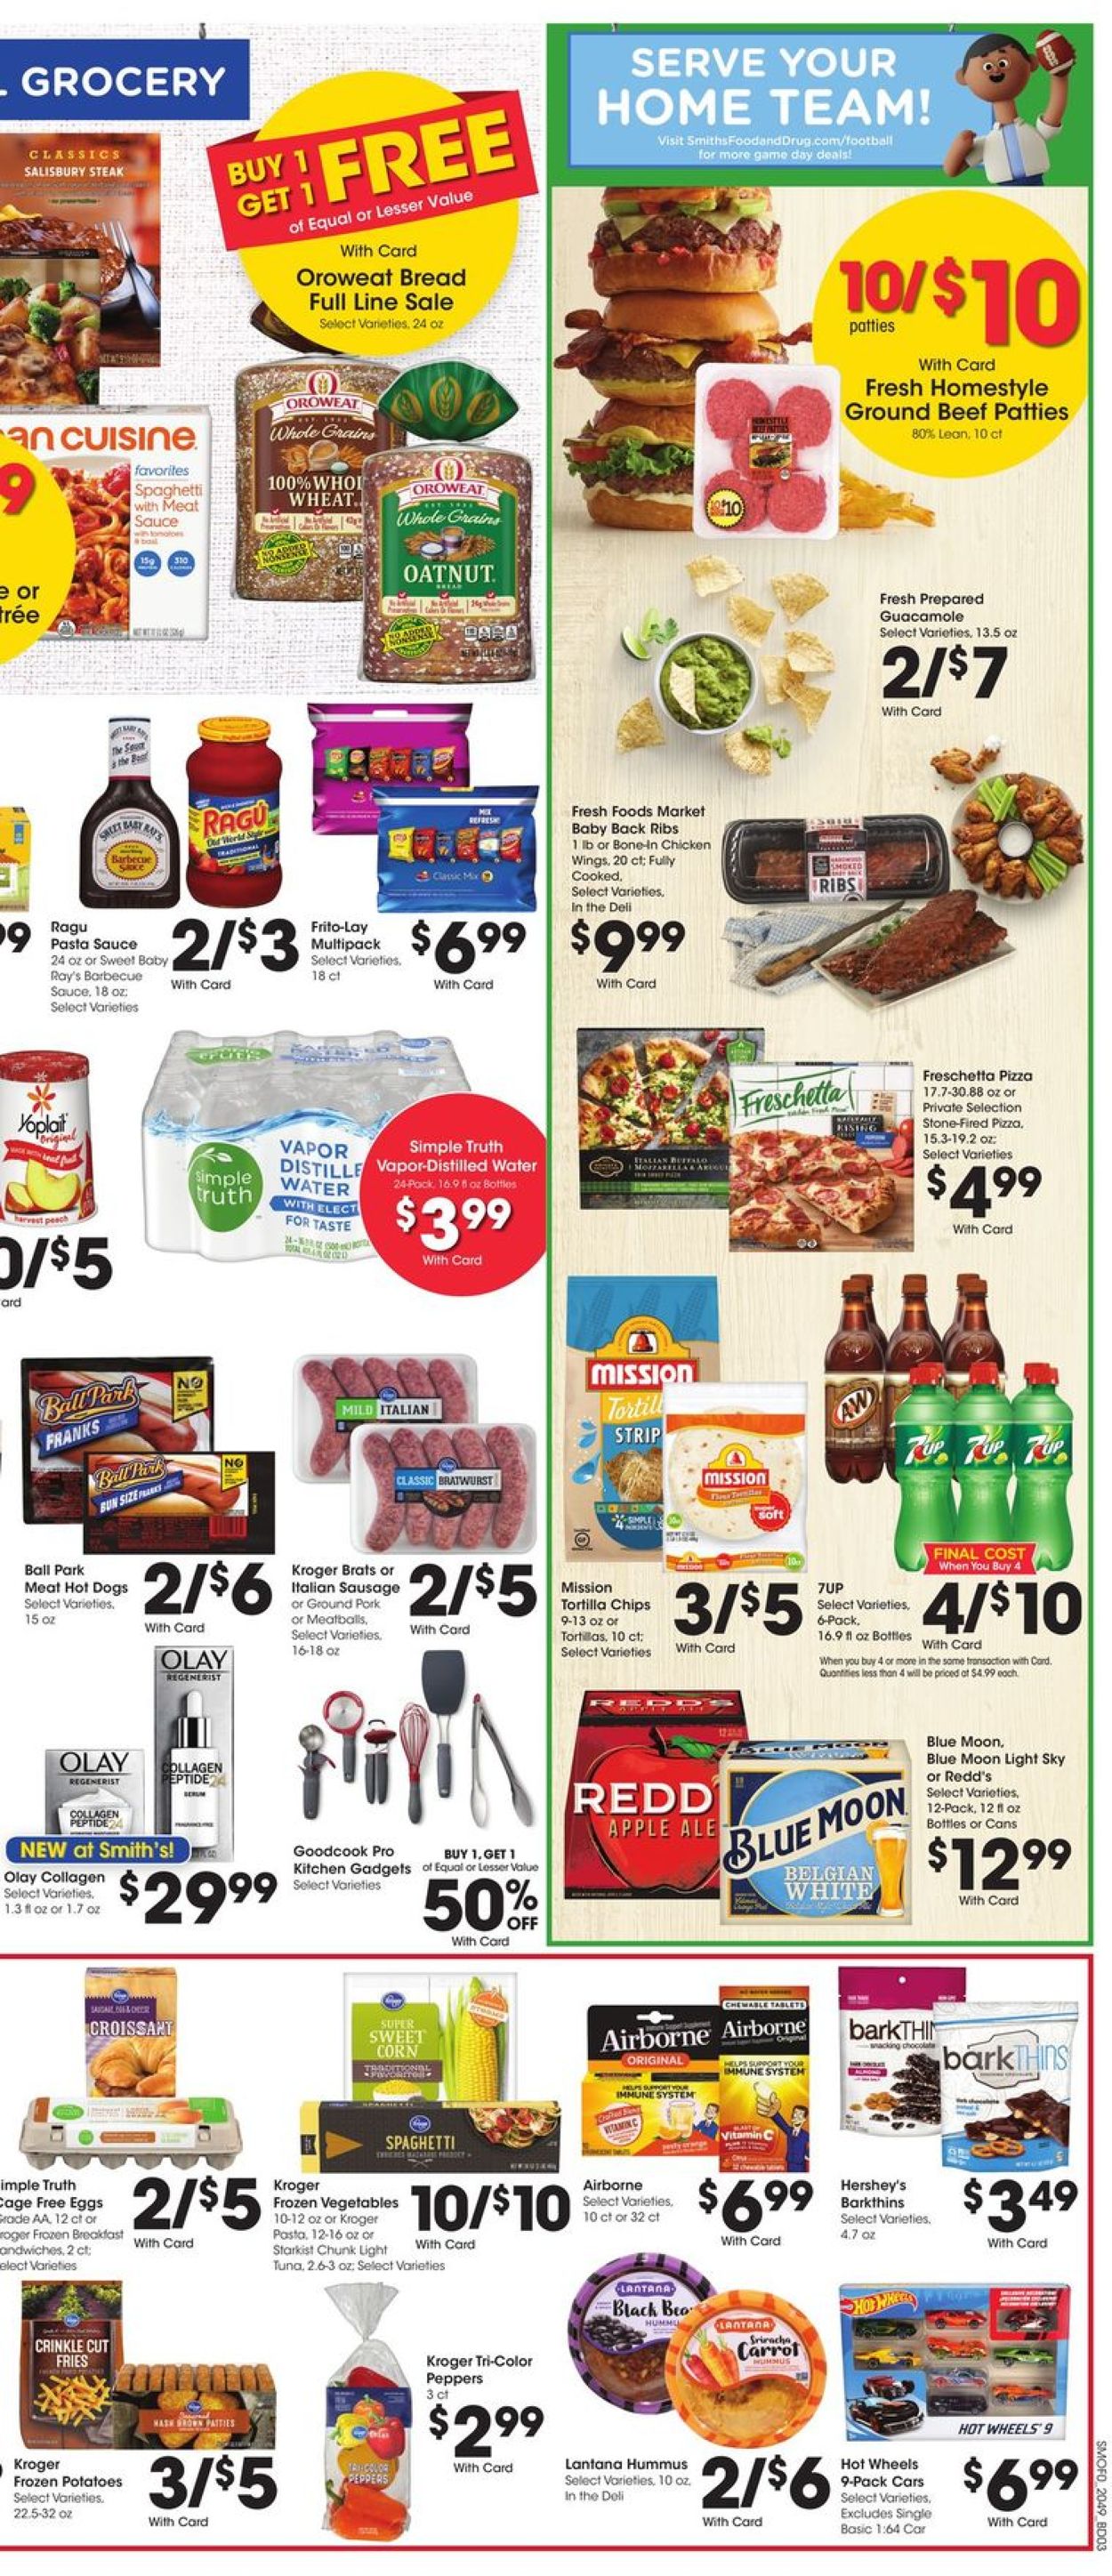 Smith's Current weekly ad 01/06 - 01/12/2021 [5] - frequent-ads.com